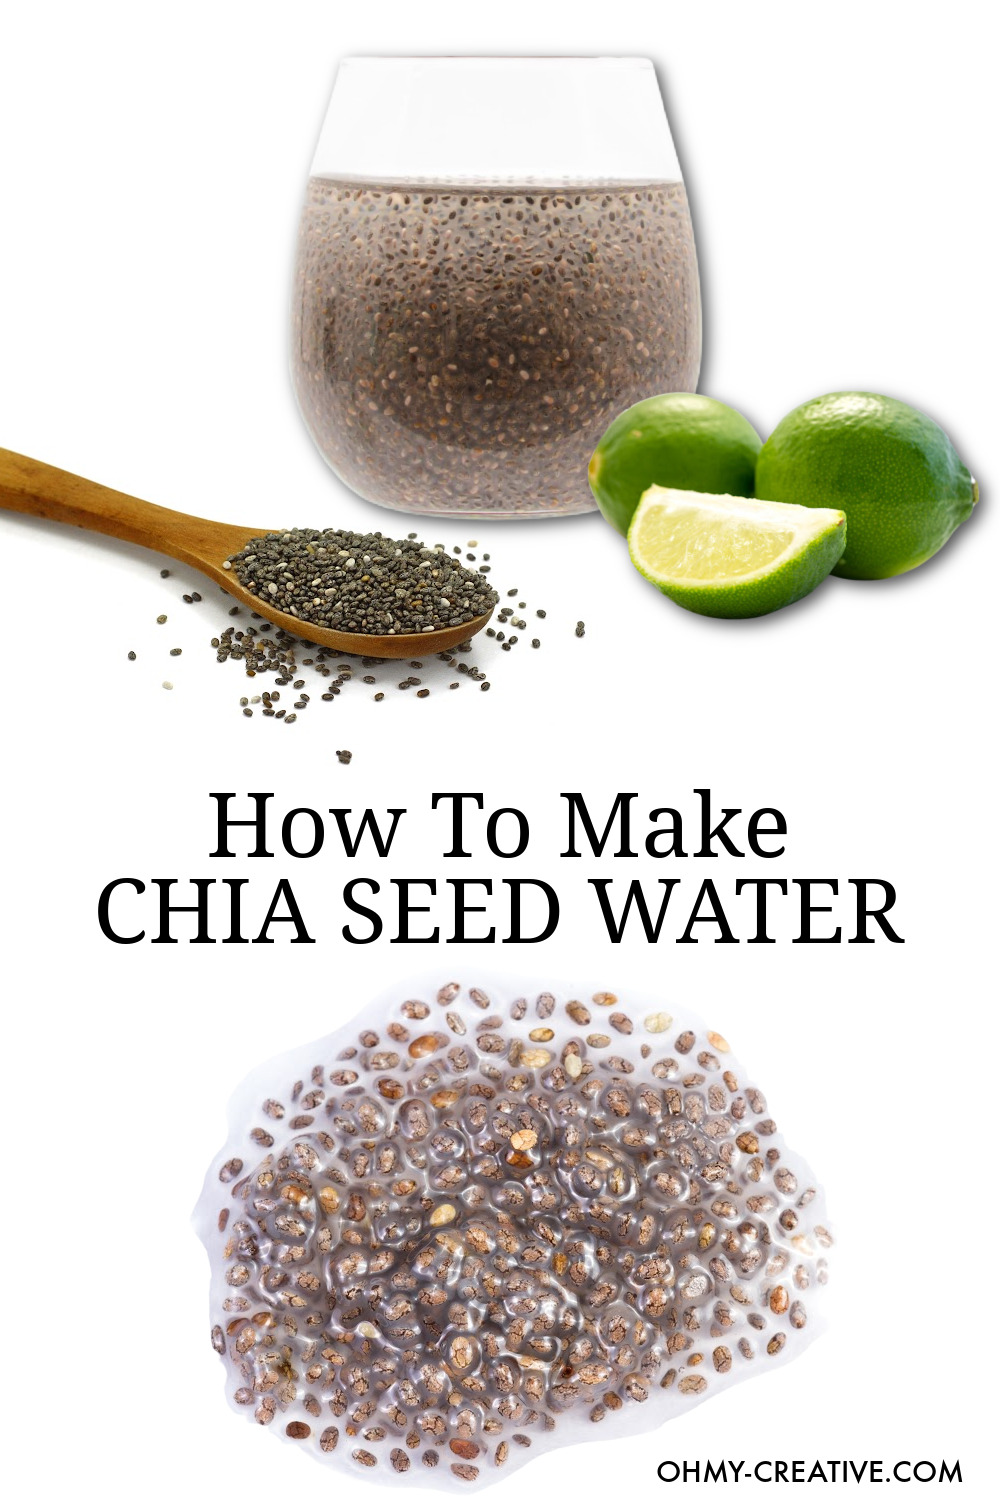 How to make chia seed water. Showing a wooden spoon with chia seeds, slices of lime and a glass of chia seed water. At the bottom is a drizzle of chia seeds expanded in water.